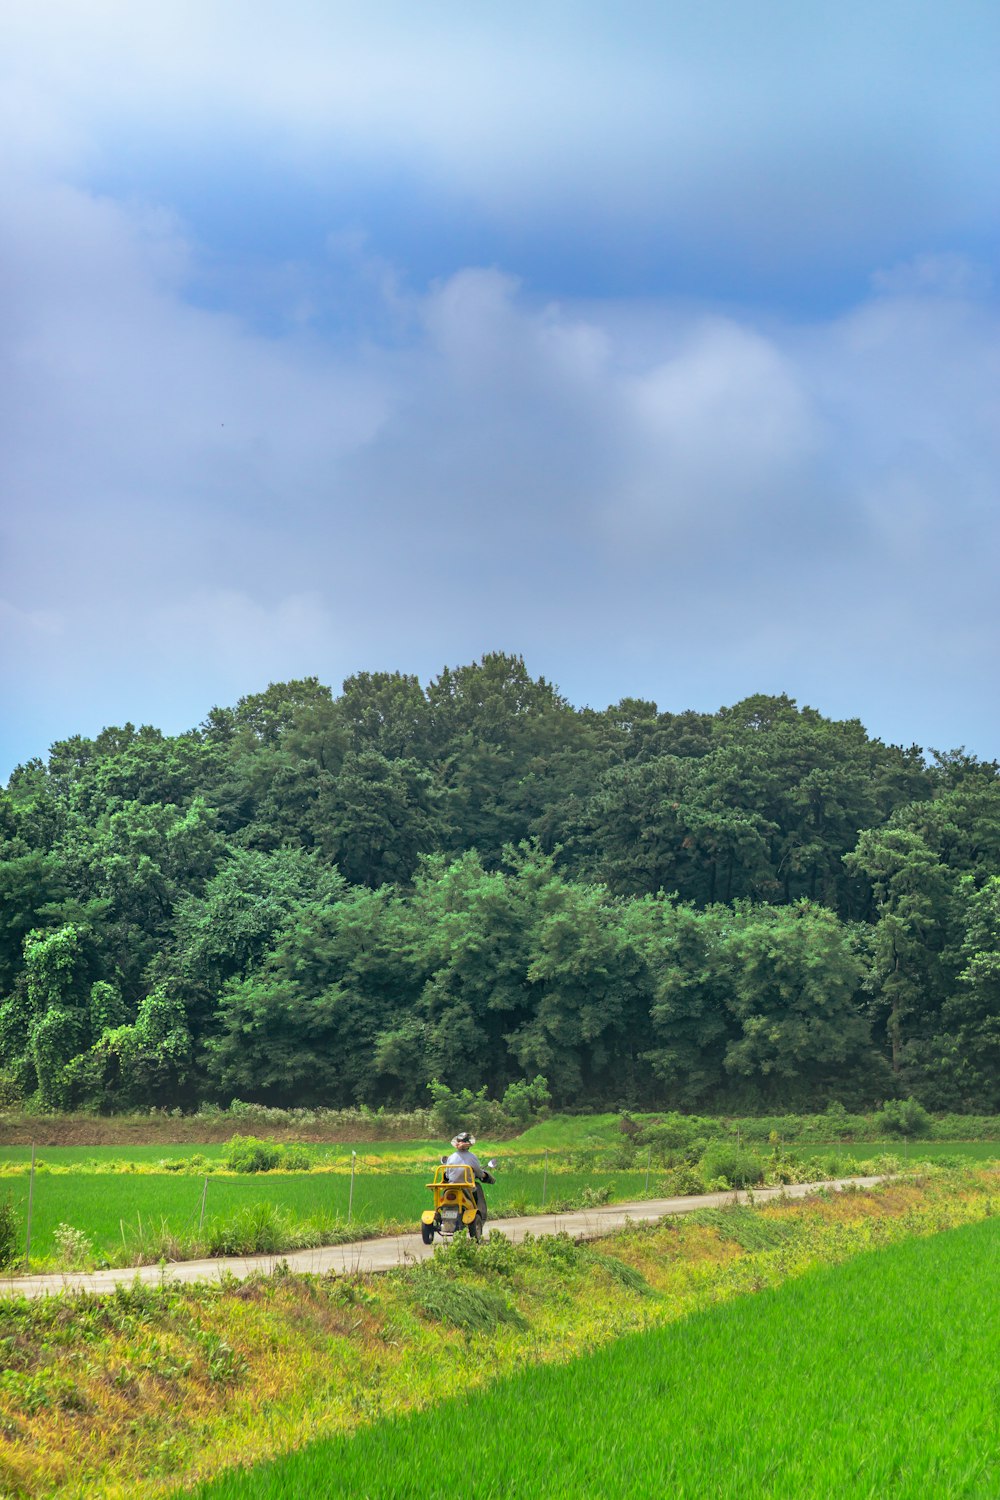 a person riding a motorcycle on a dirt road surrounded by trees